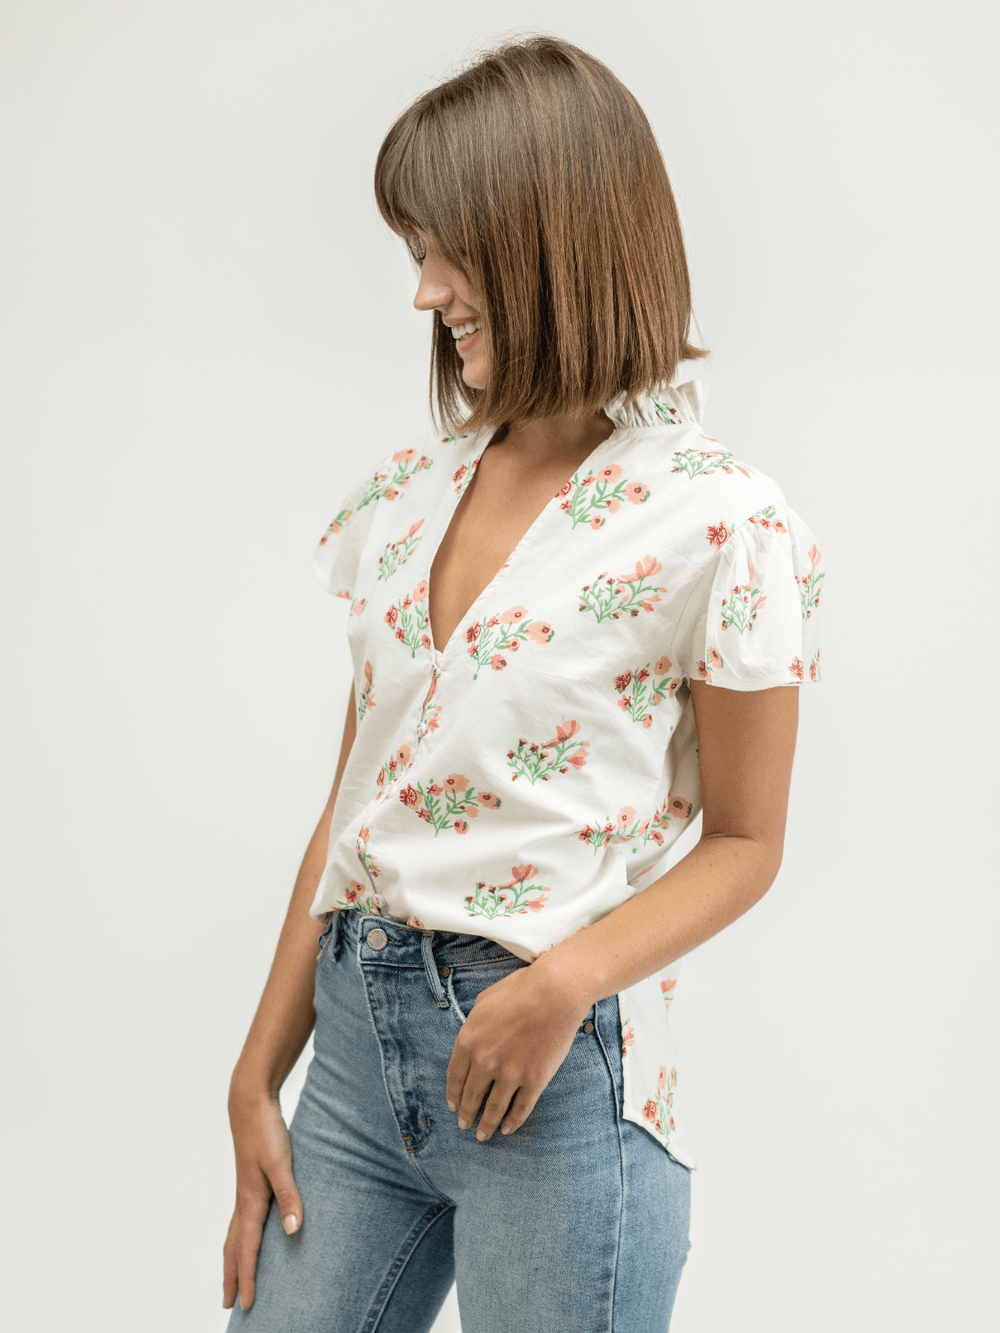 Beau & Ro Top The Flutter Top | Pink Floral